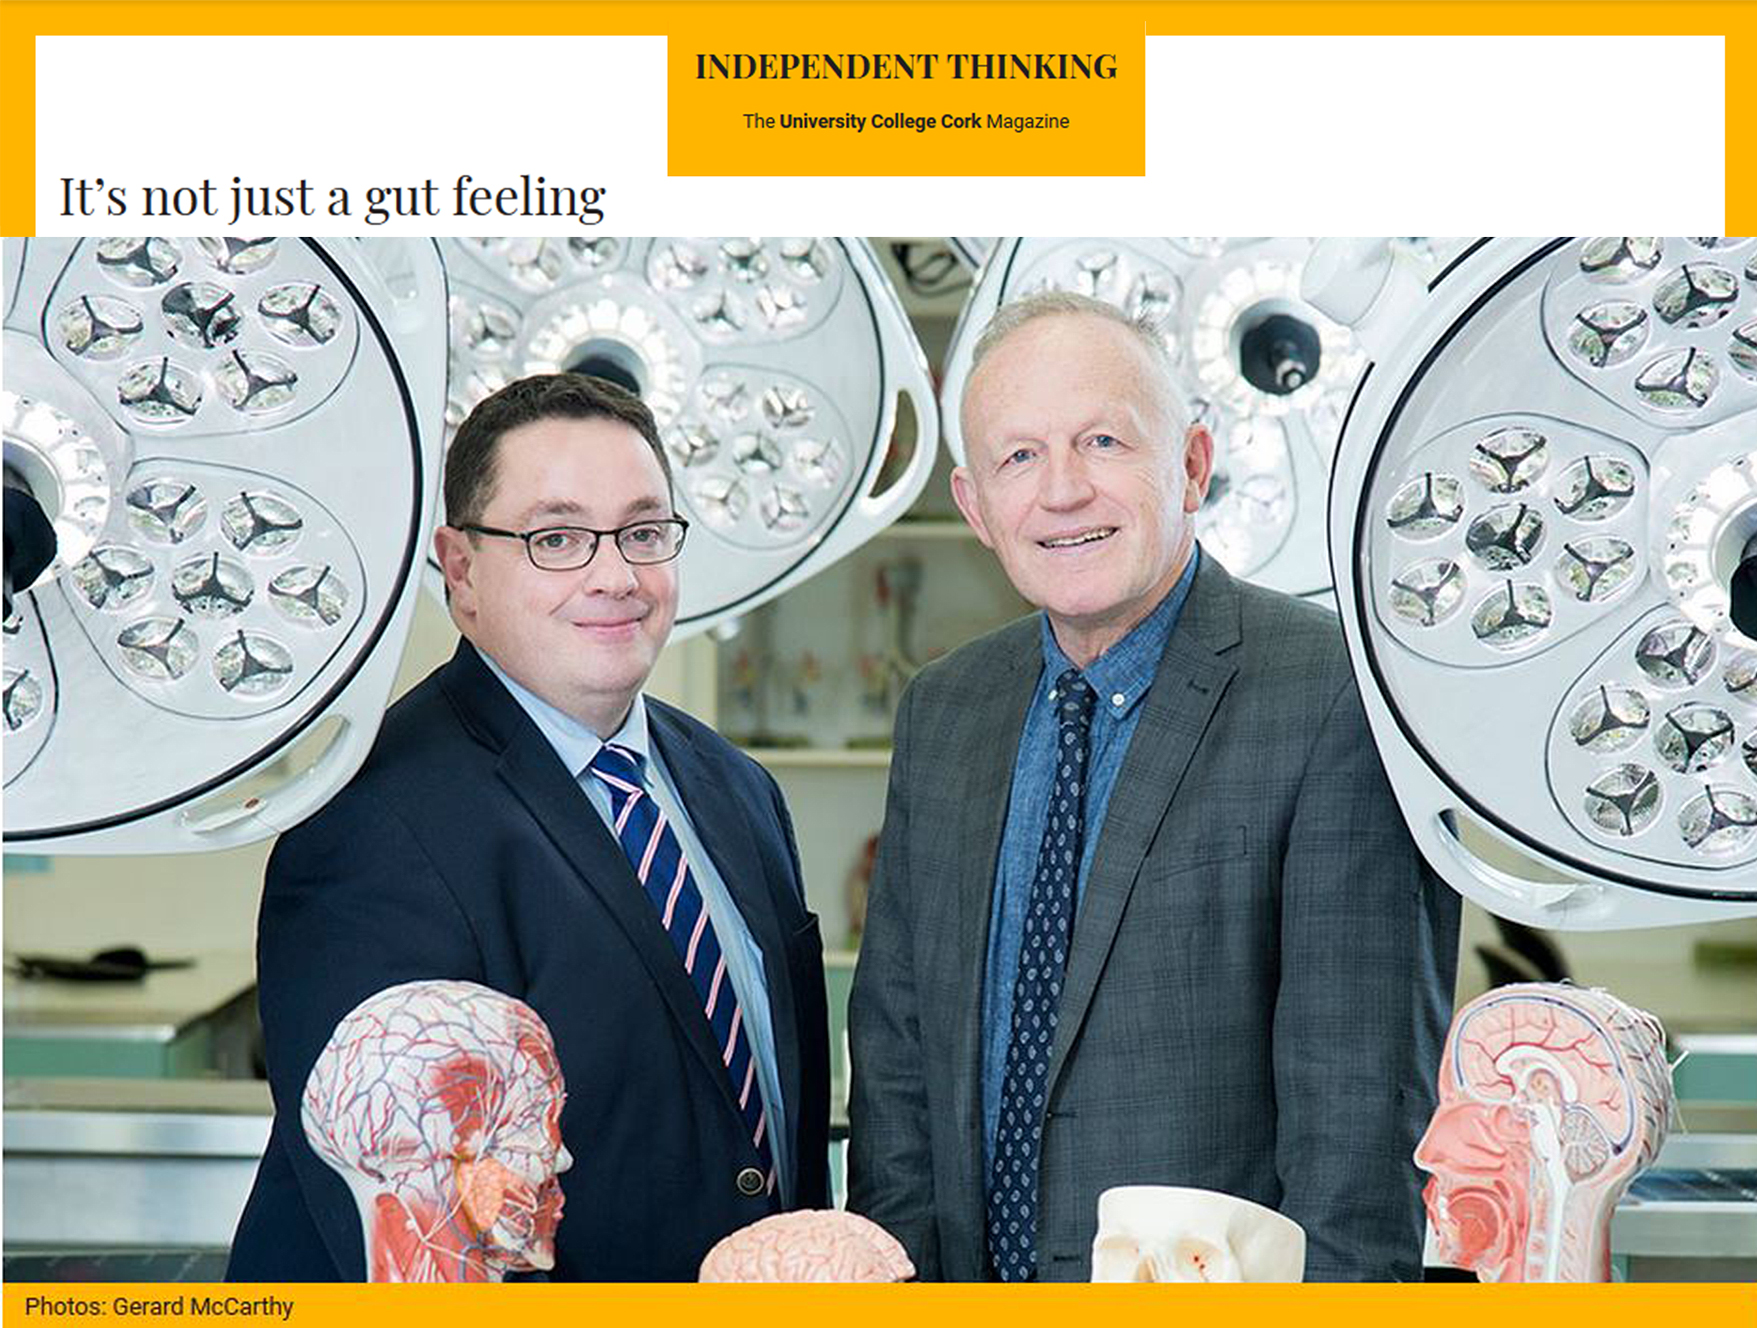 Prof Cryan profiled in UCC's Independent Thinking Magazine